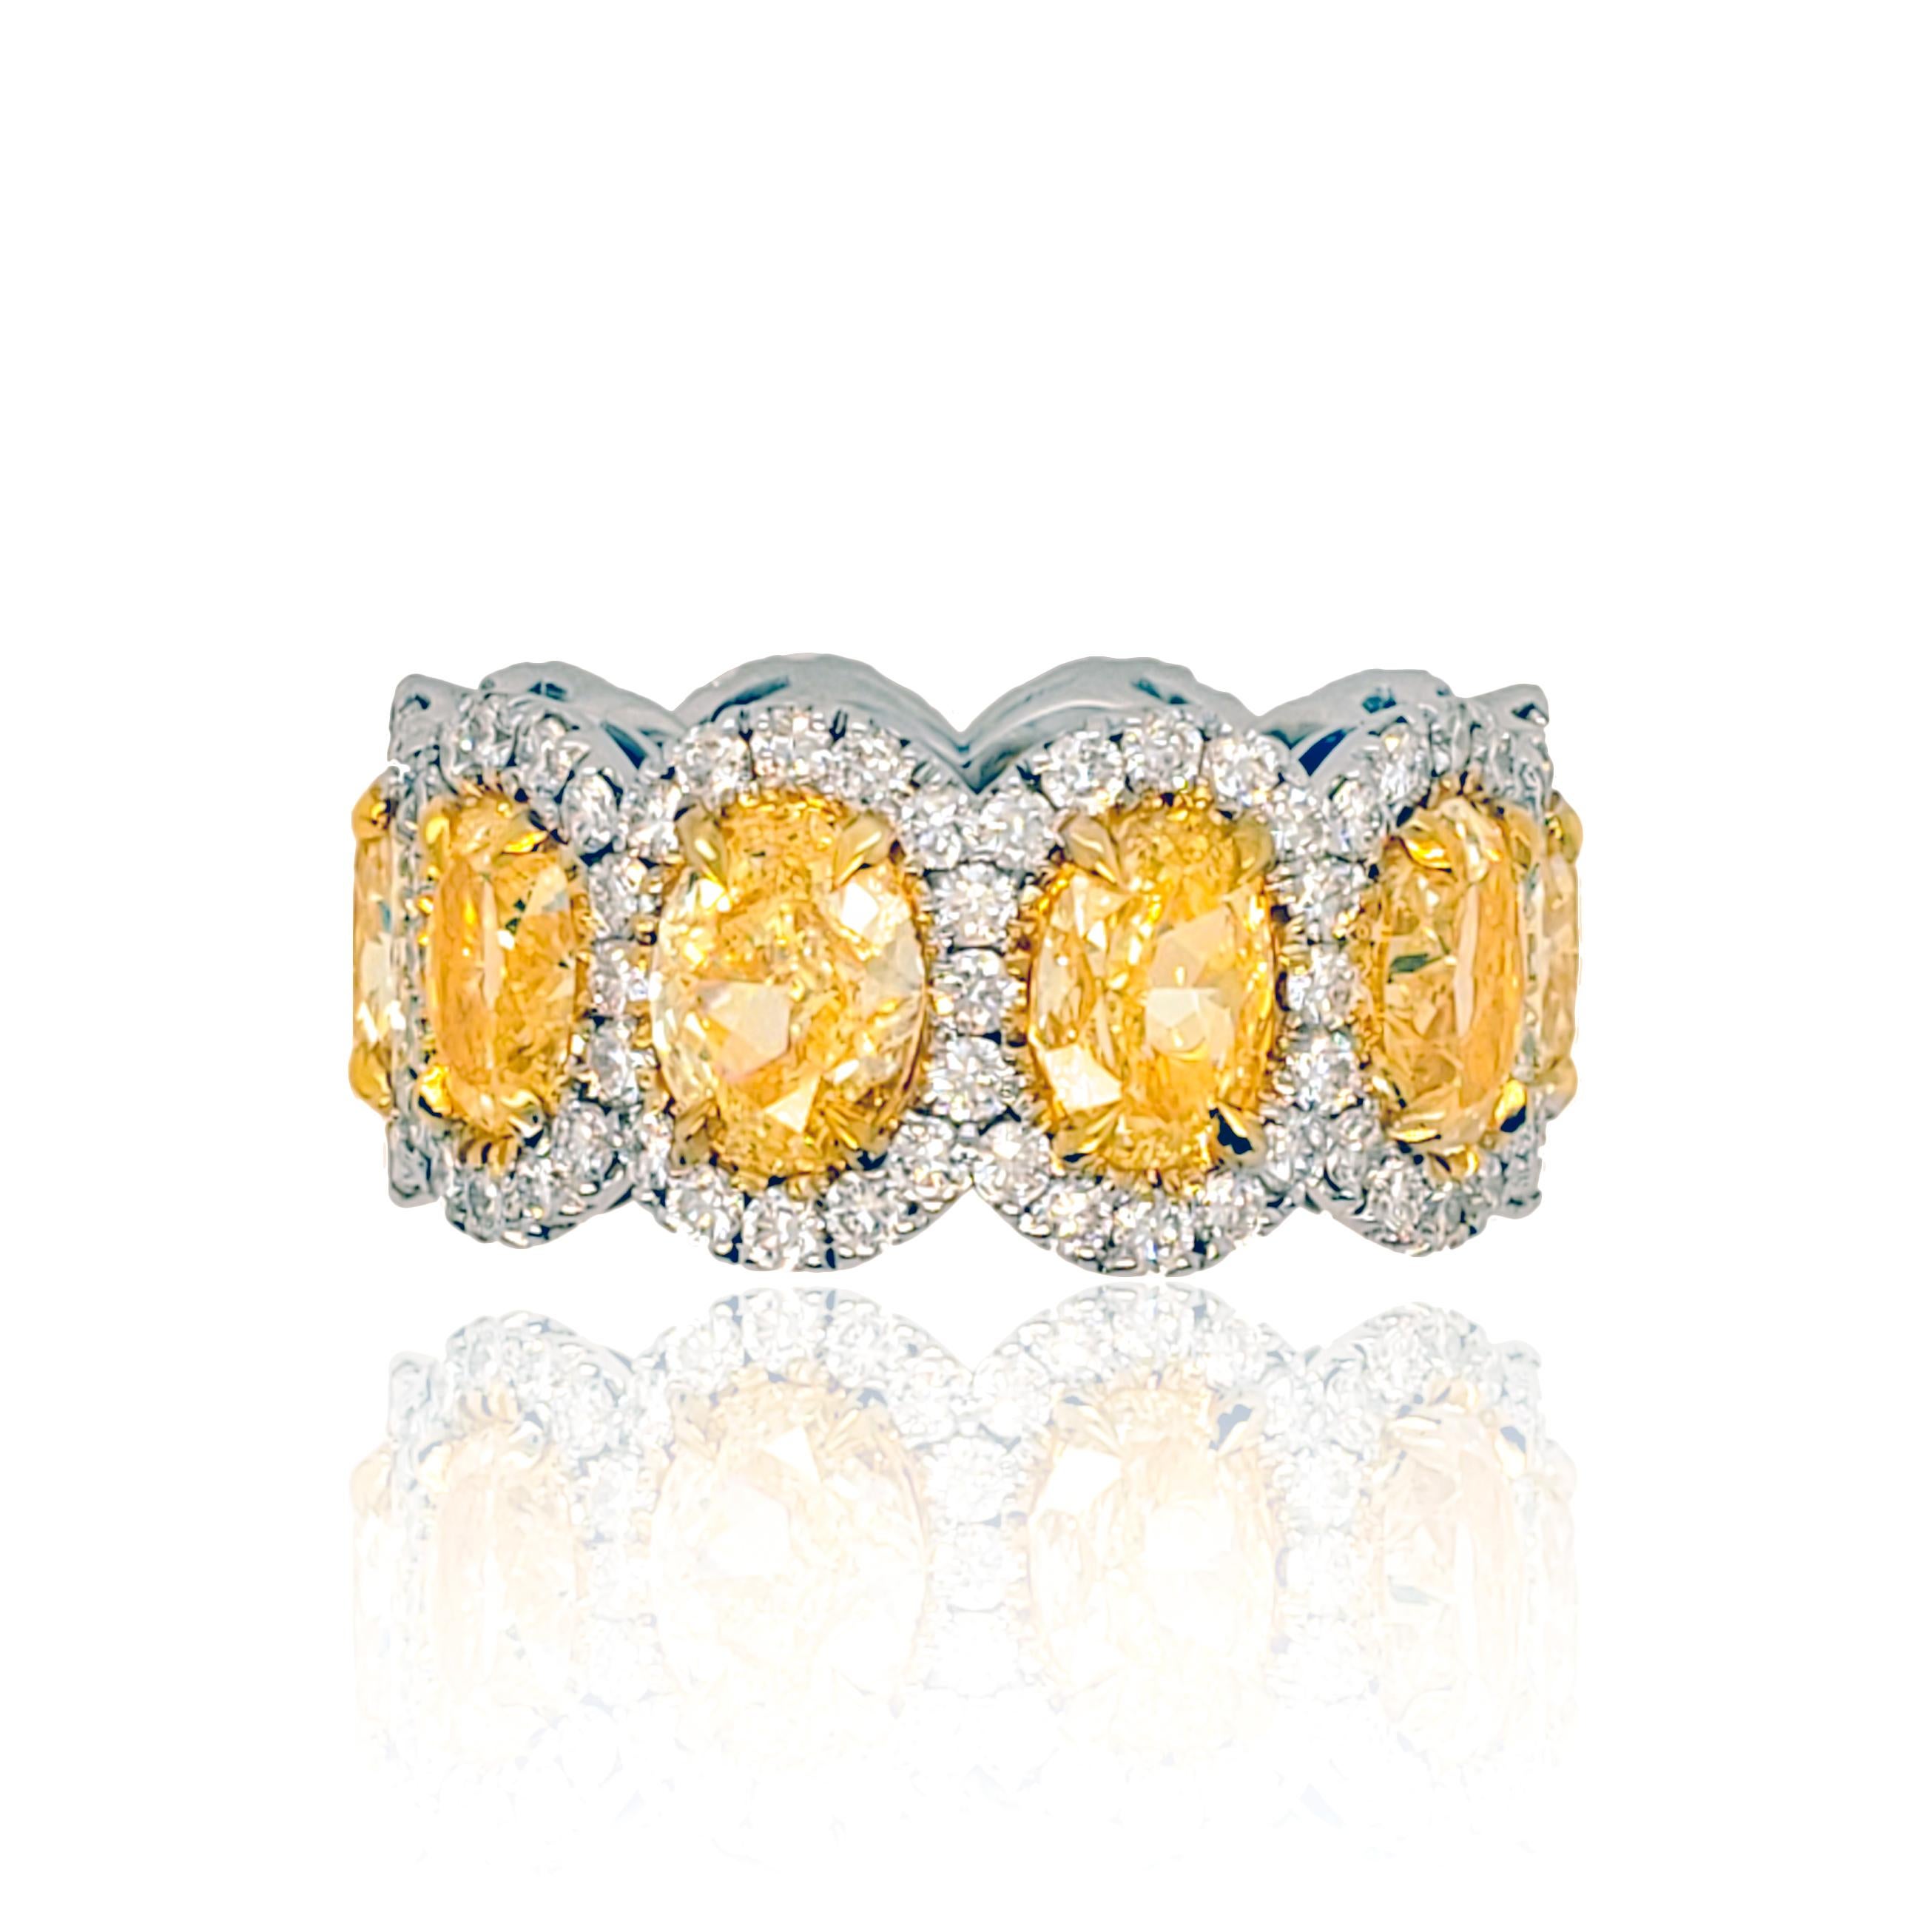 18KT TWO TONE GOLD YELLOW DIAMONDS HALO OVAL BAND. THIS BAND CONTAINS 7.71CTS DIAMONDS OVAL SHAPE YELLOW DIAMONDS AND 1.80CTS OF DIAMOND AROUND.
Diana M. is a leading supplier of top-quality fine jewelry for over 35 years.
Diana M is one-stop shop